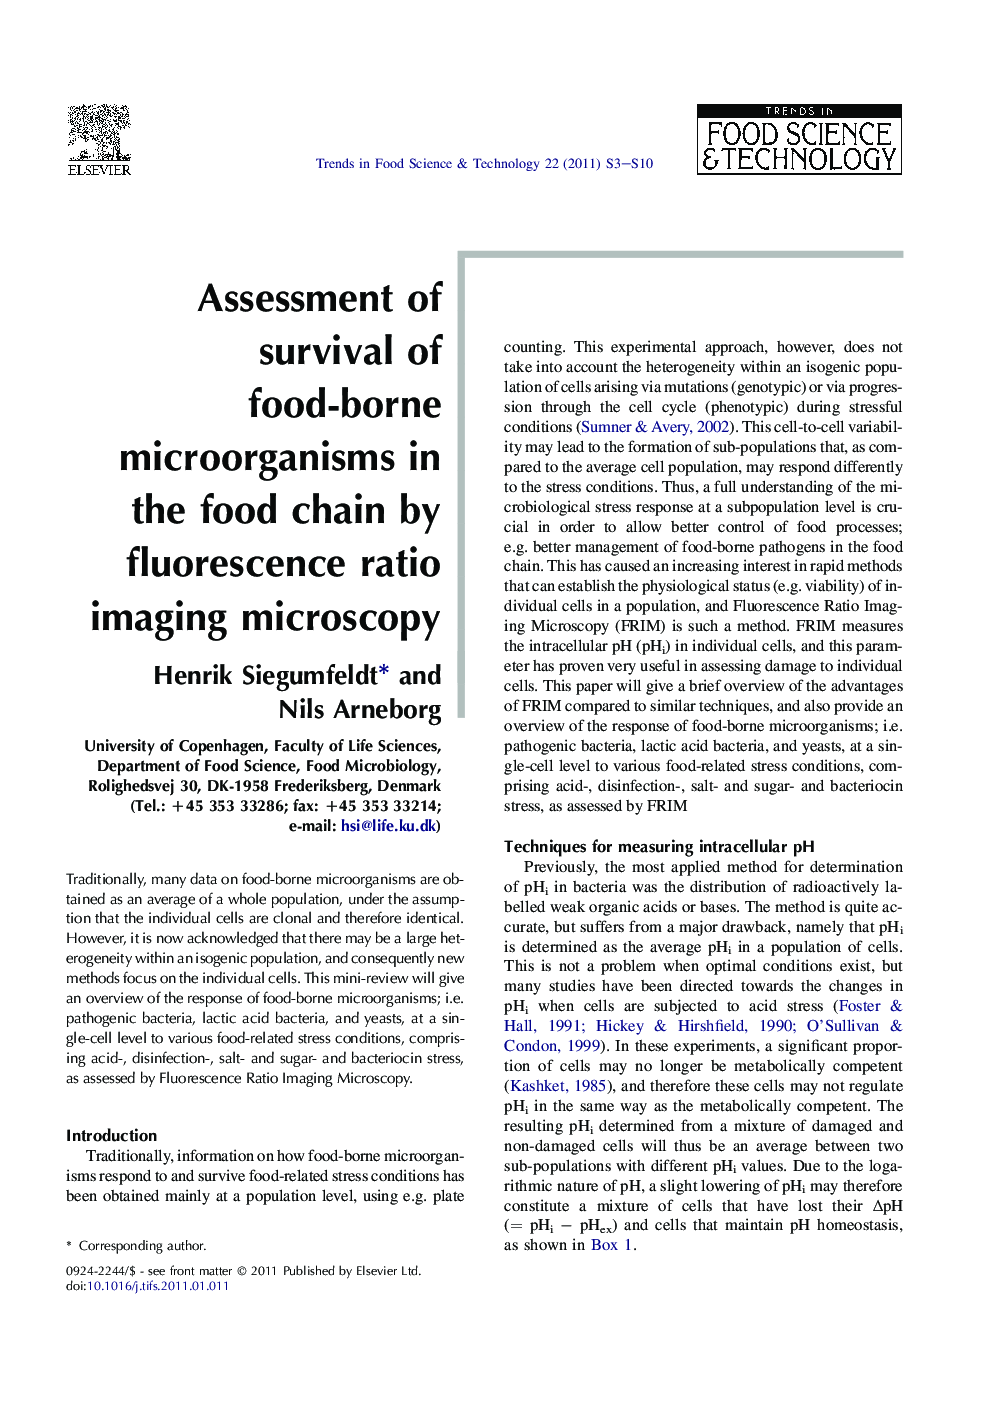 Assessment of survival of food-borne microorganisms in the food chain by fluorescence ratio imaging microscopy